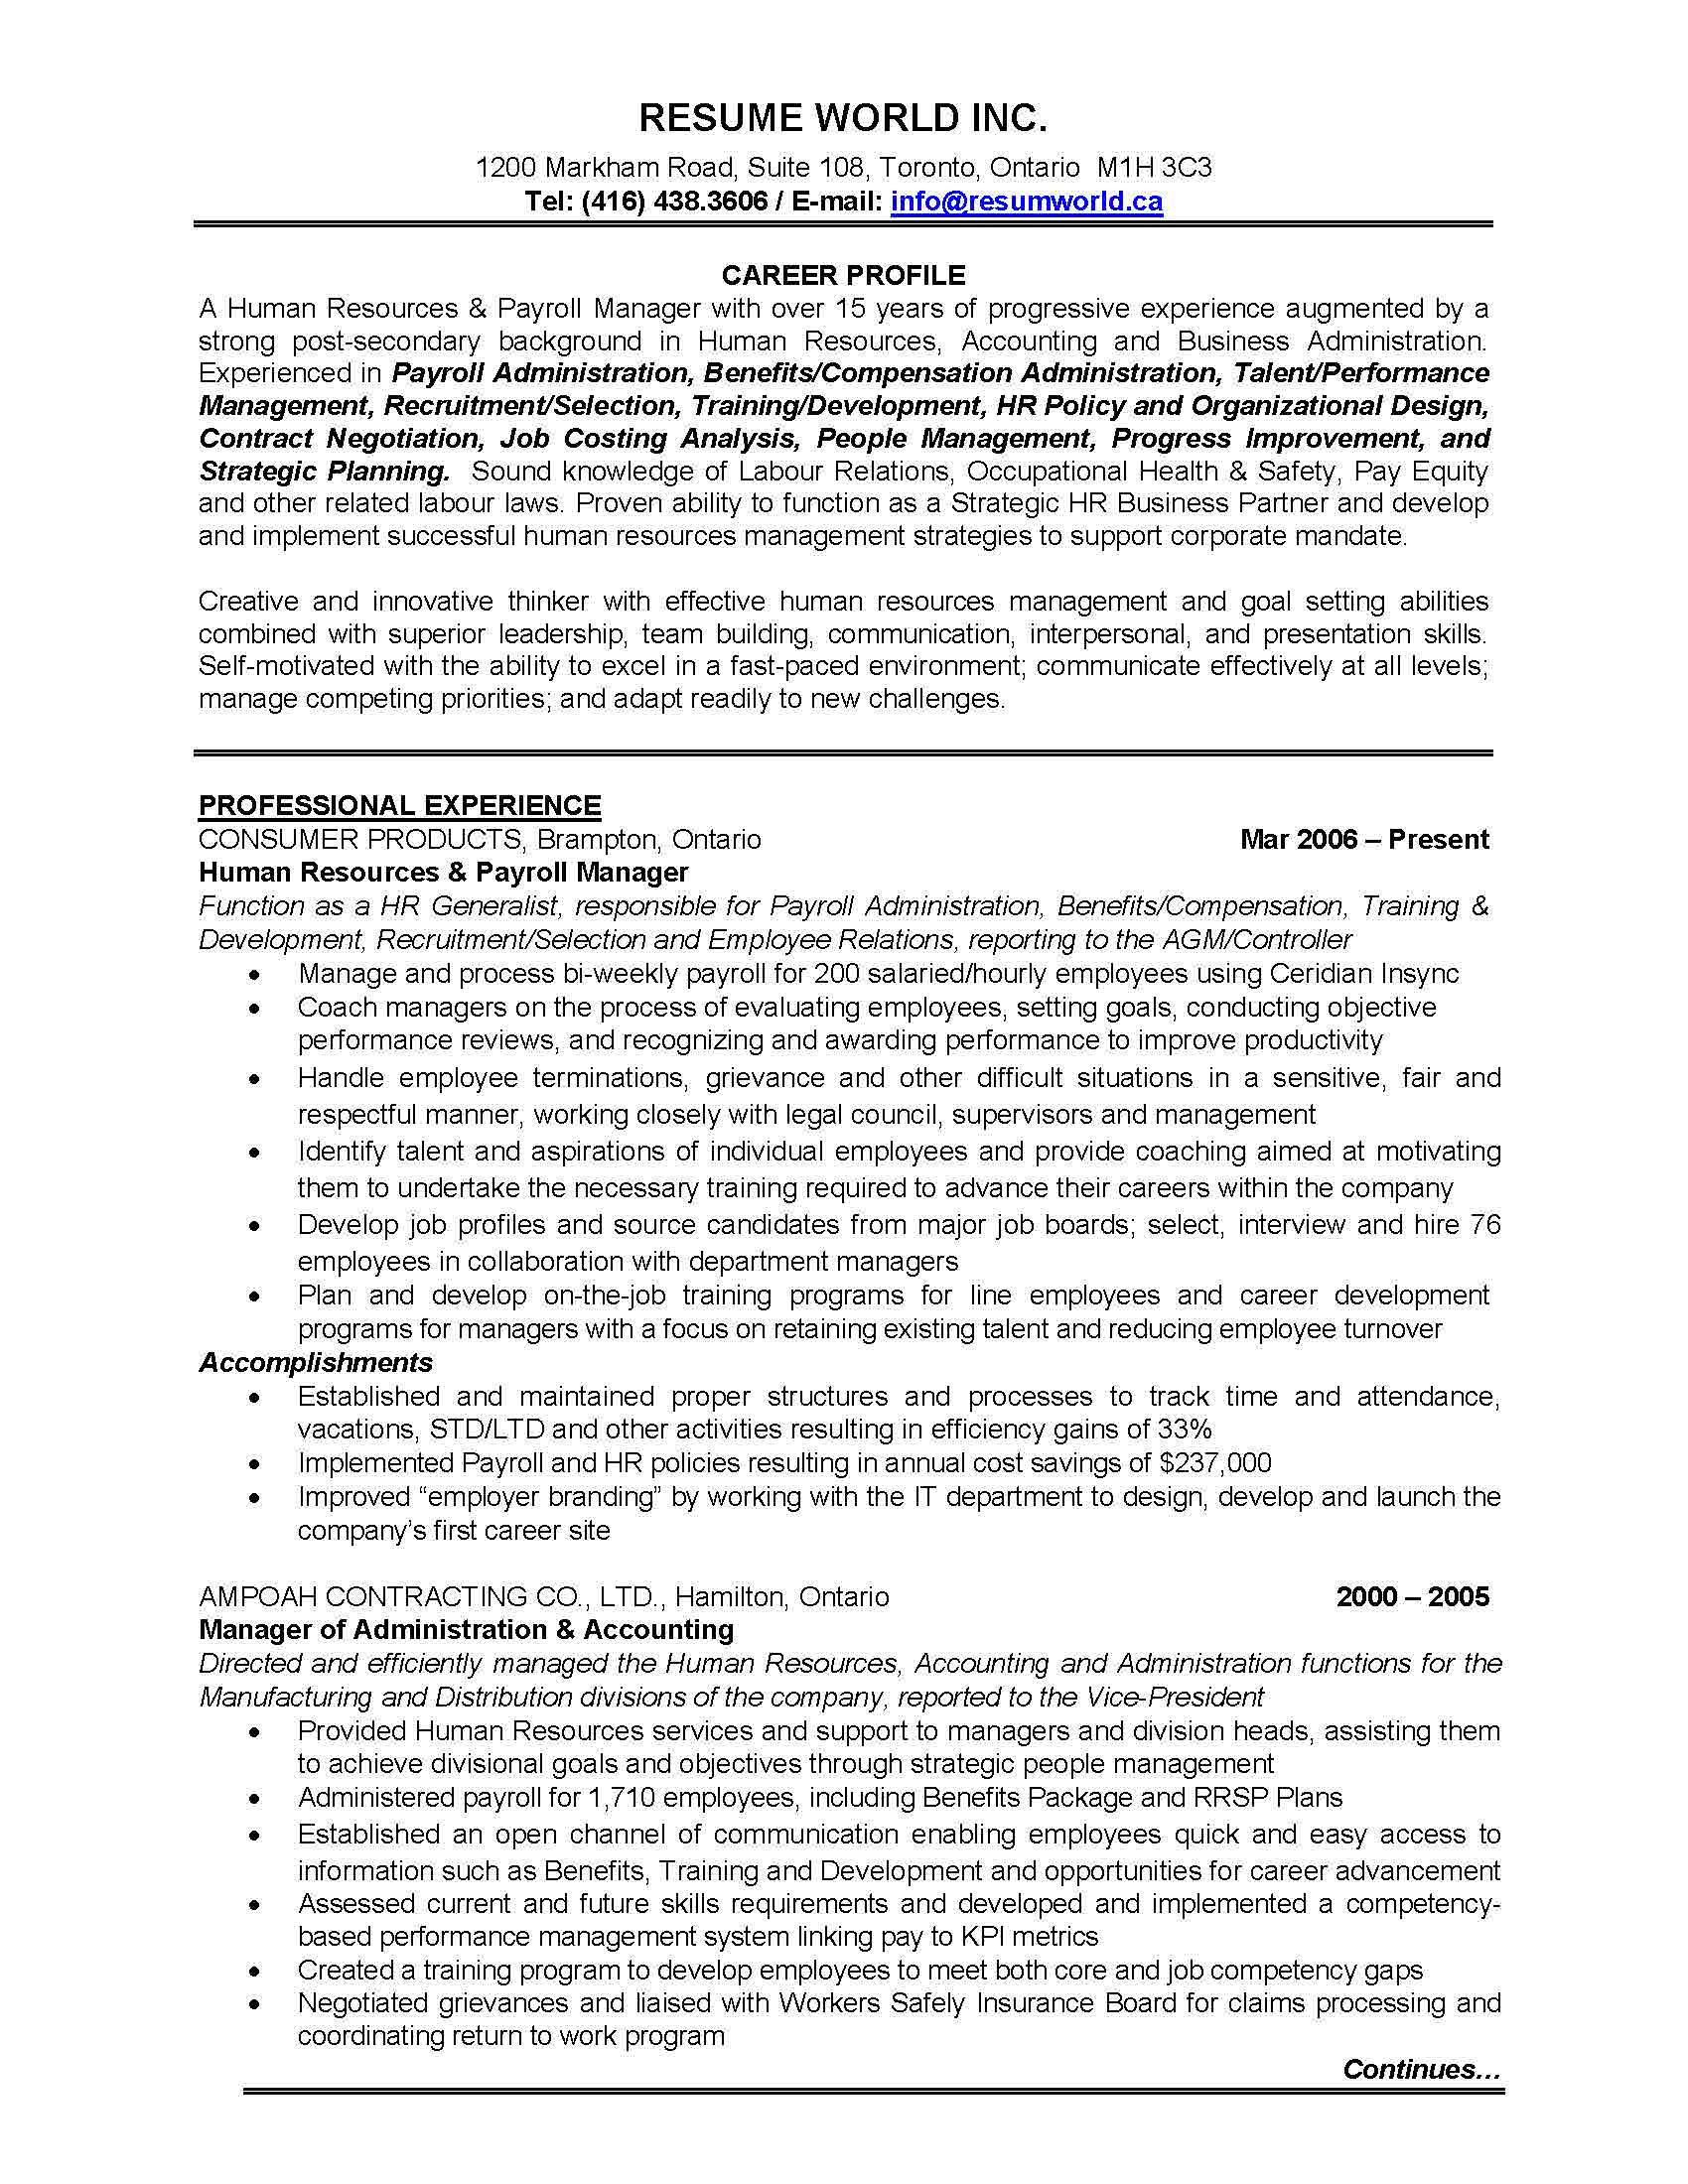 Vp Of Human Resources Resume Sample Human Resources Manager